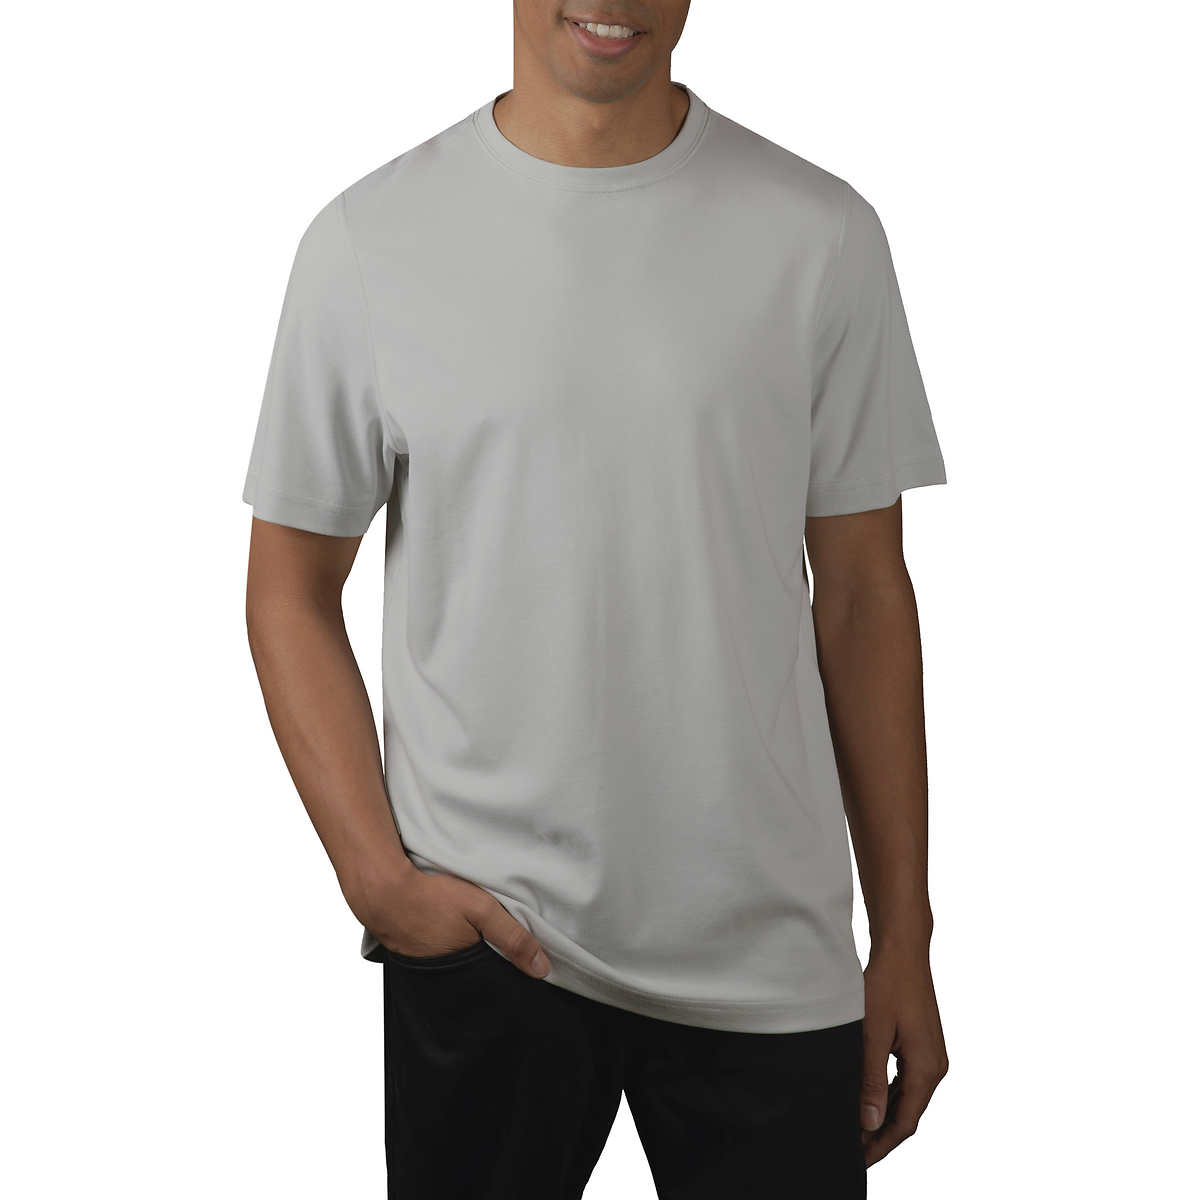 Costco Members: Kirkland Signature Men’s Pima Cotton Tee (3 colors) 5 for $20 or 2 for $10 + Free Shipping